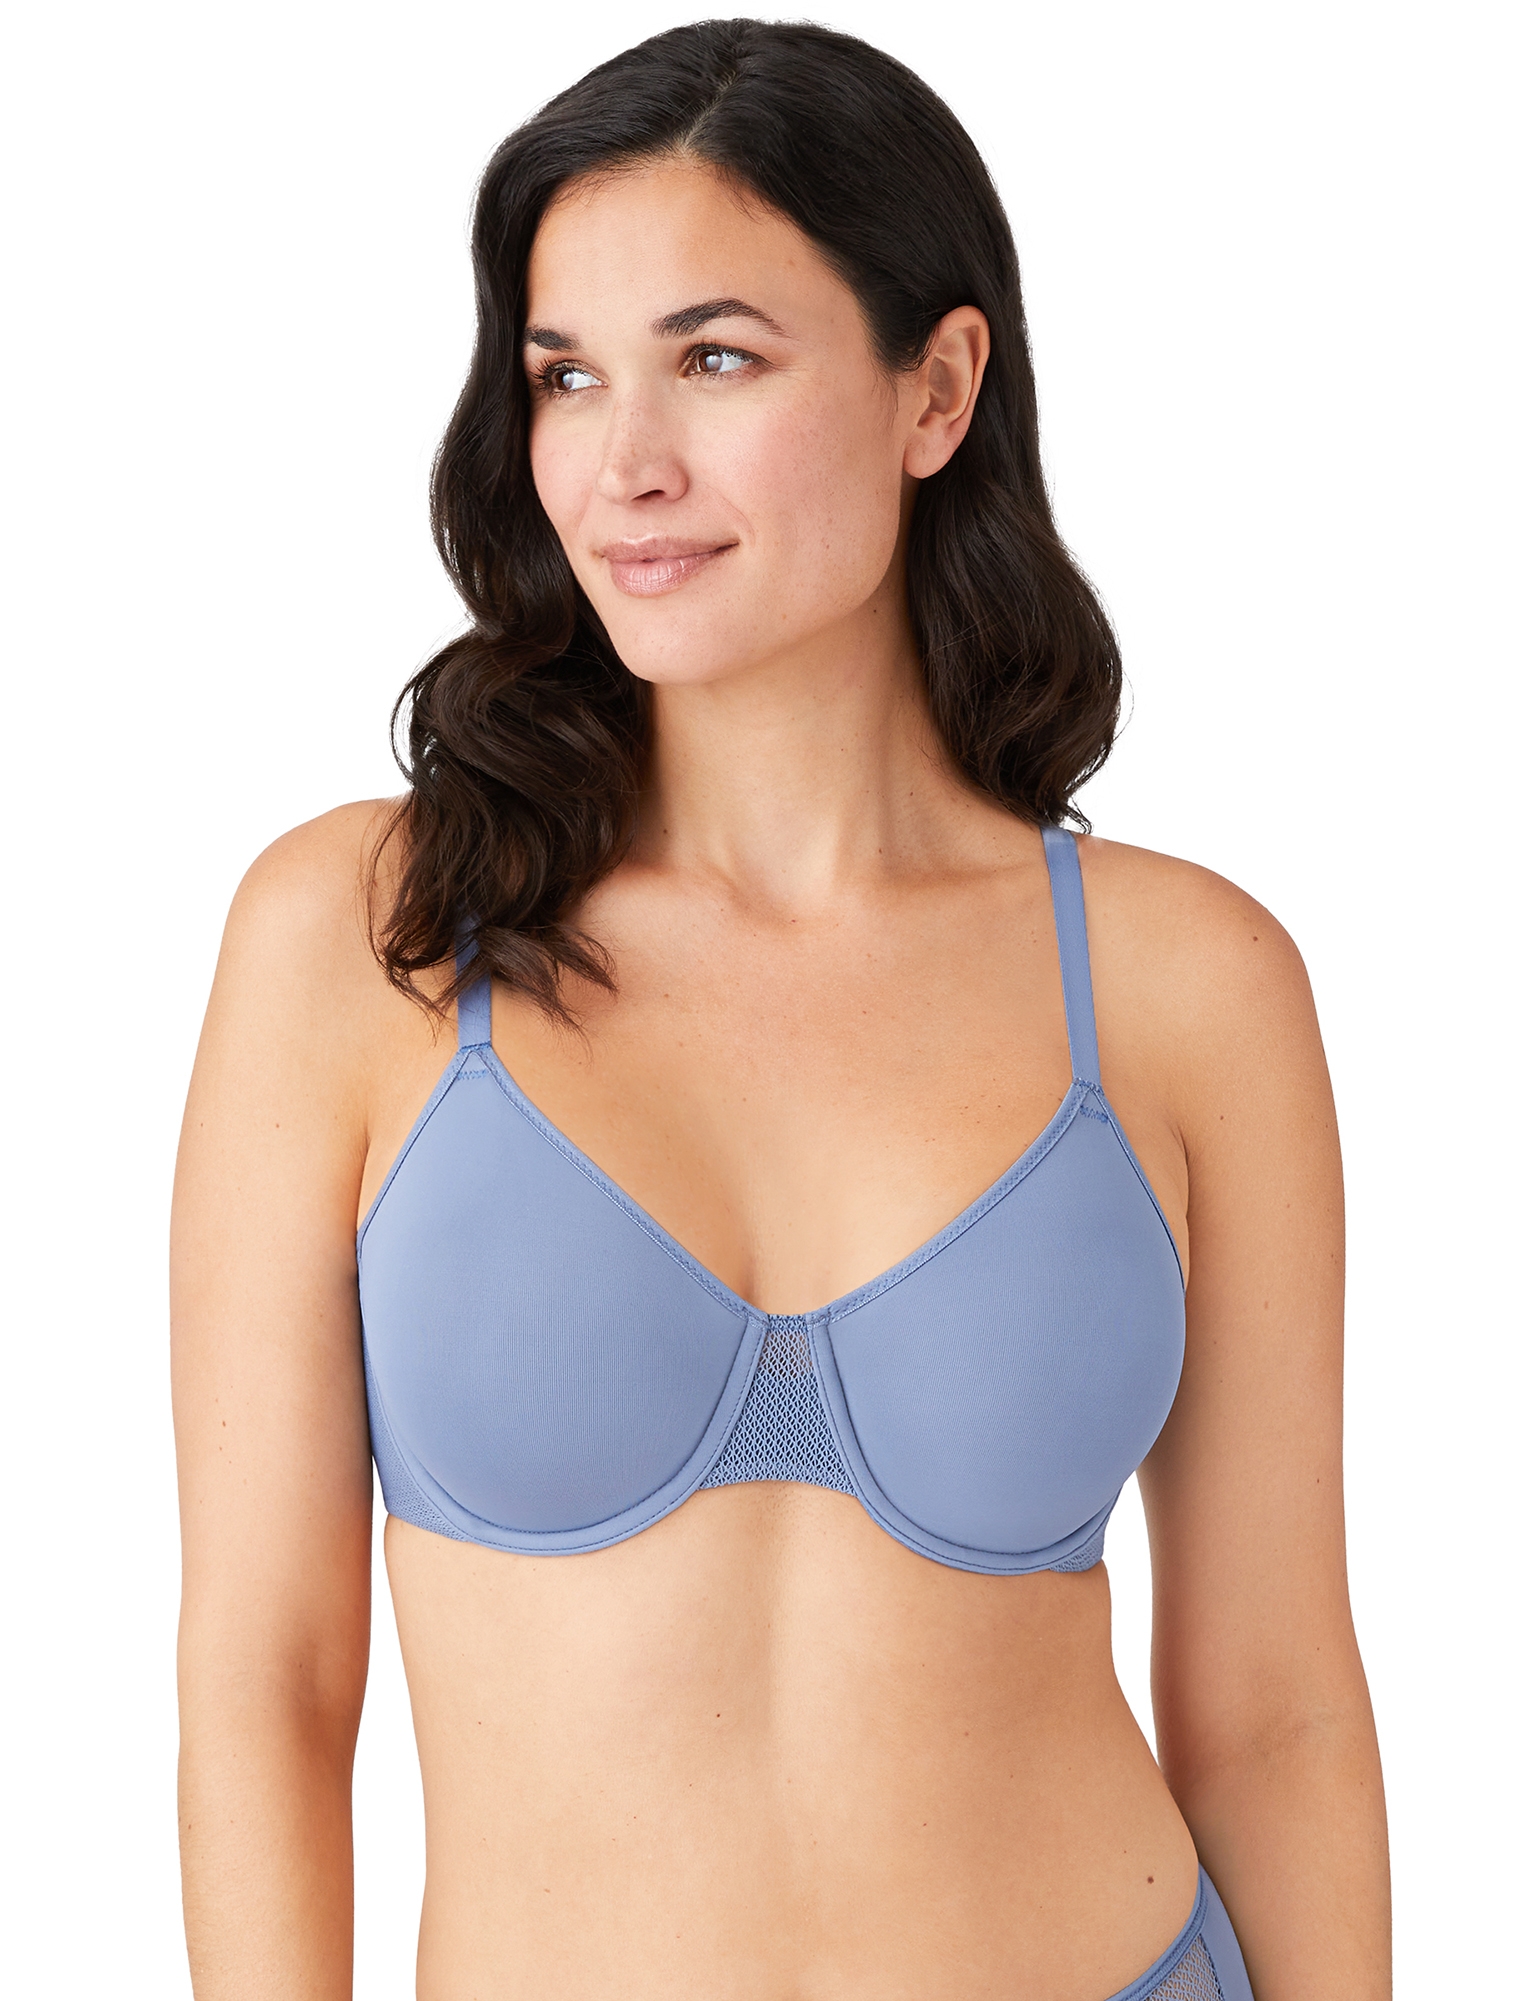 Stylish Comfortable Padded Bra Which Makes Stock Photo 1438914095